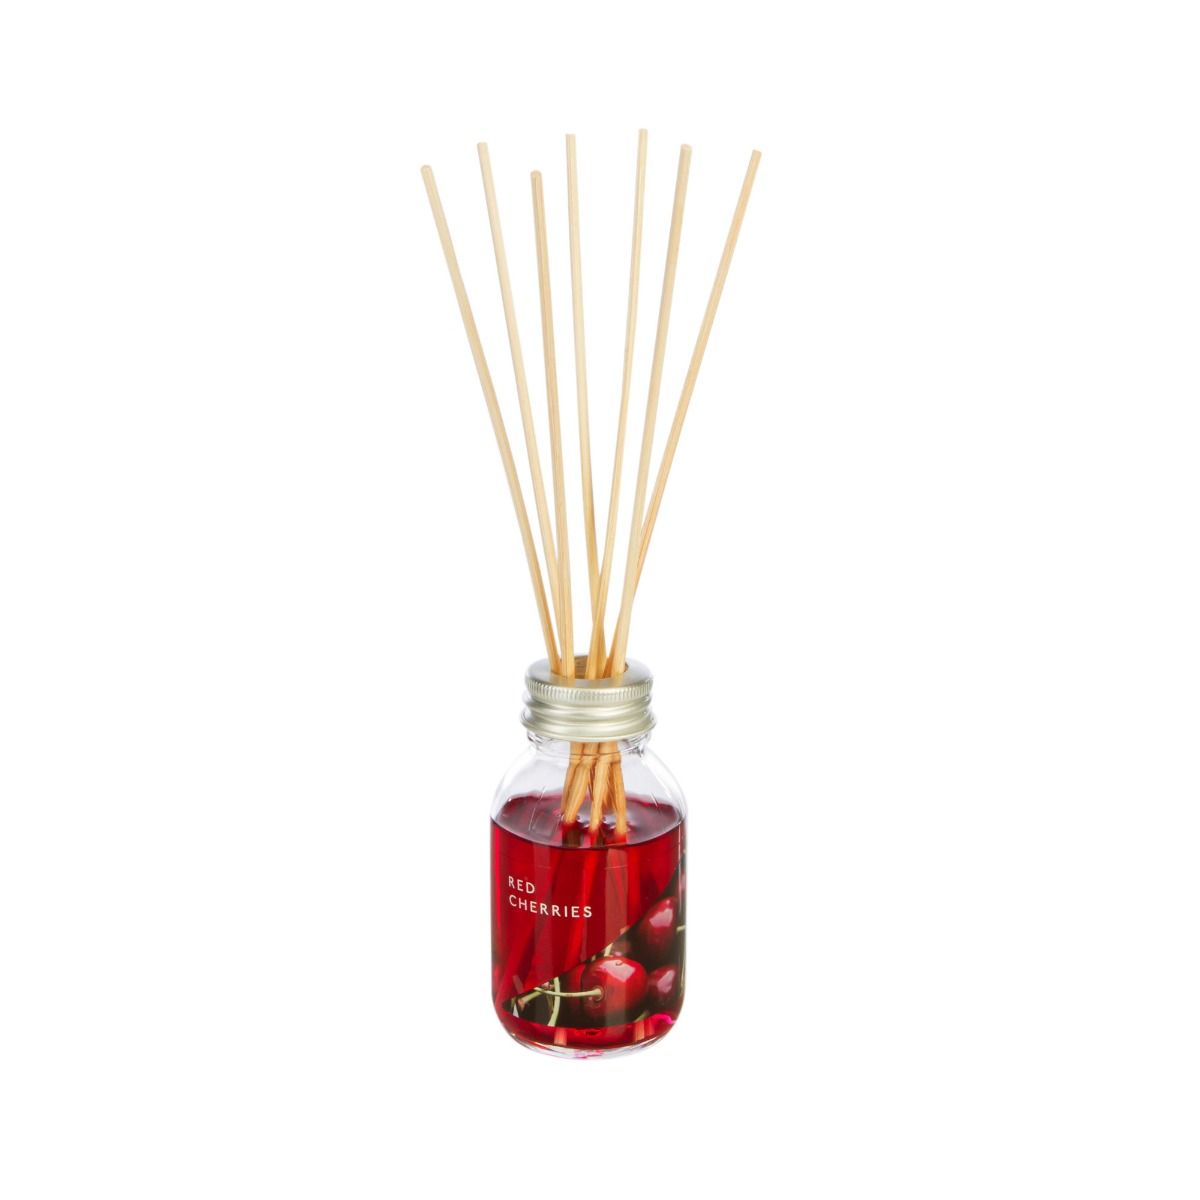 Wax Lyrical Red Cherries 100ml Reed Diffuser